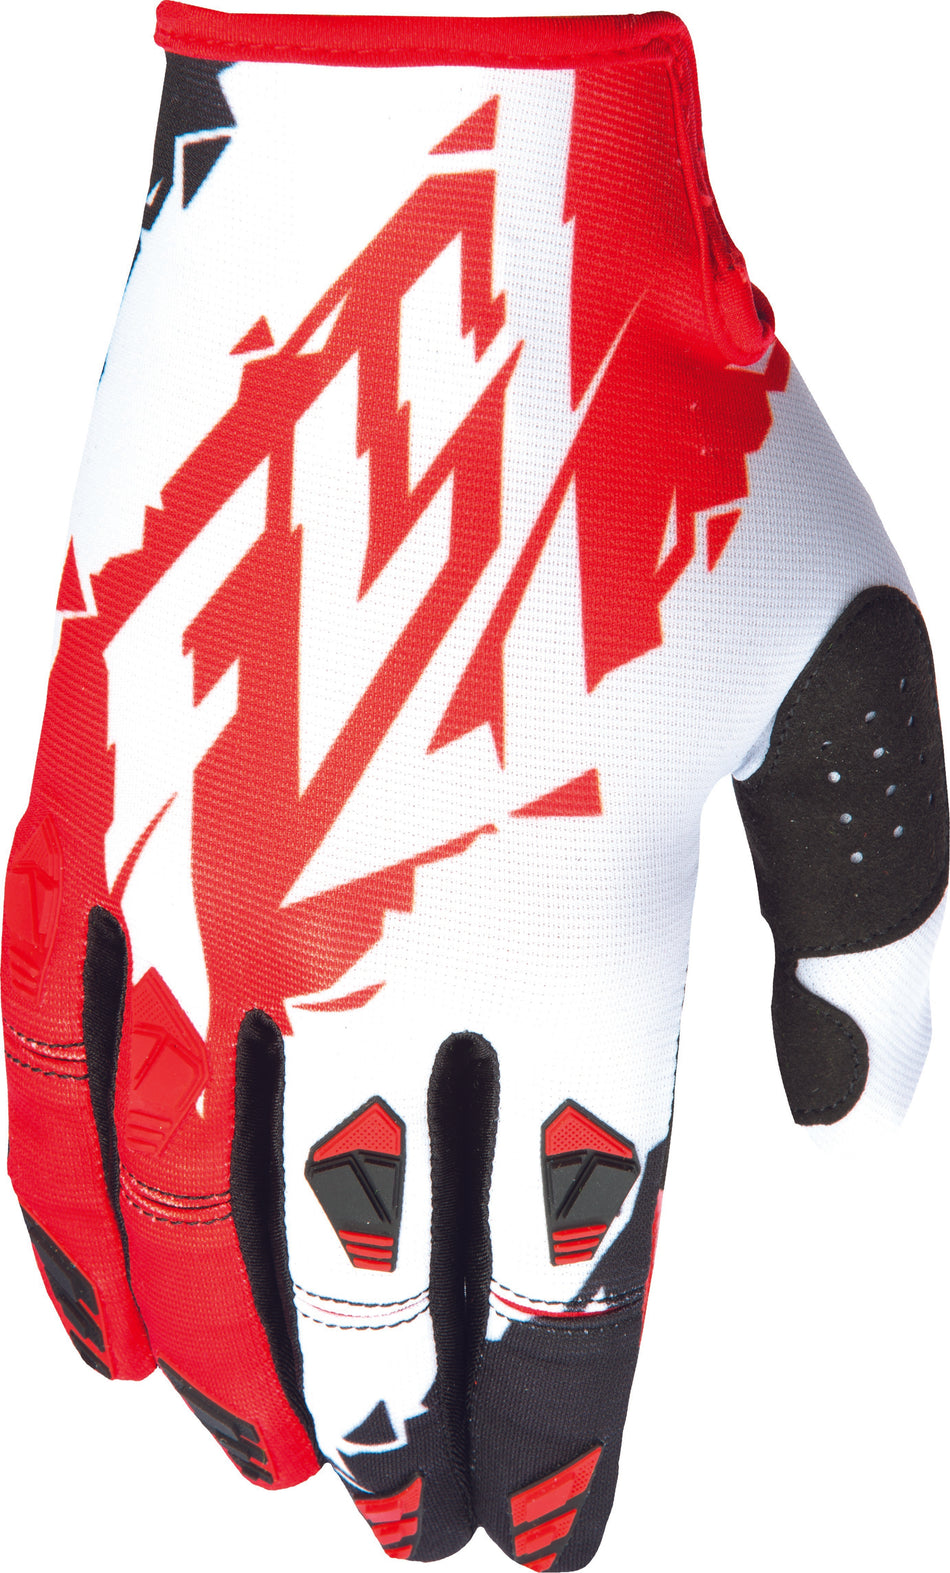 FLY RACING Kinetic Glove Red/White Sz 13 3x 370-41413